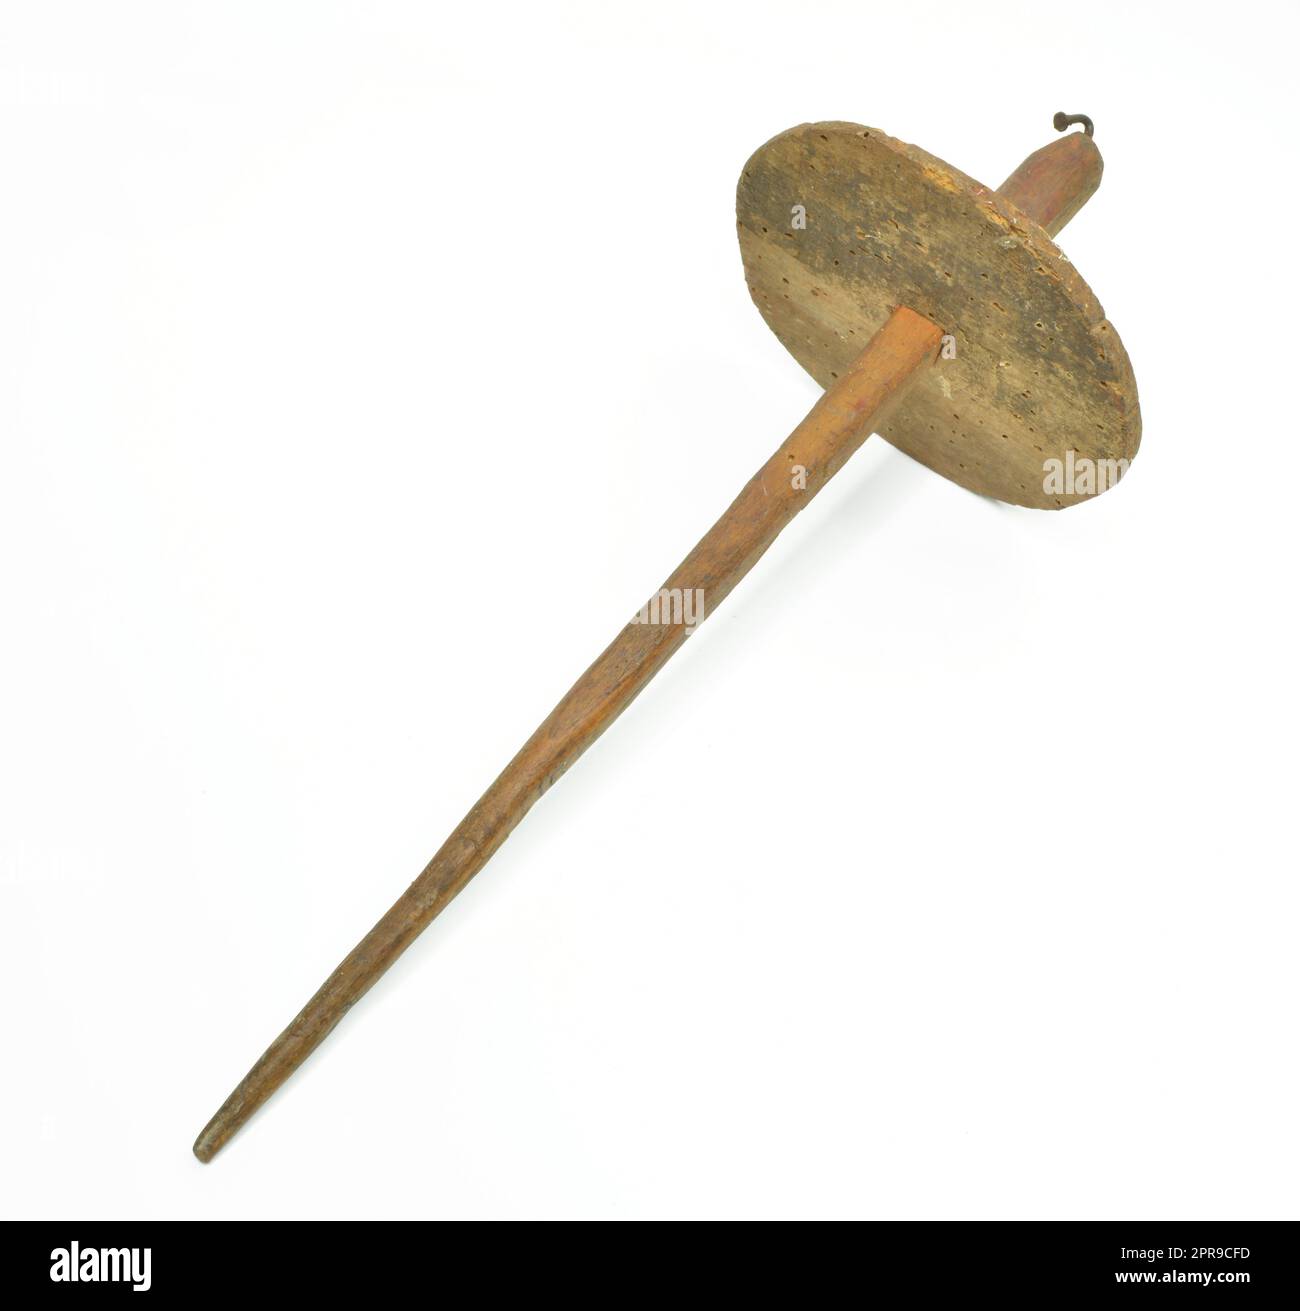 Wooden Piercing Sword used for training in fencing Stock Photo